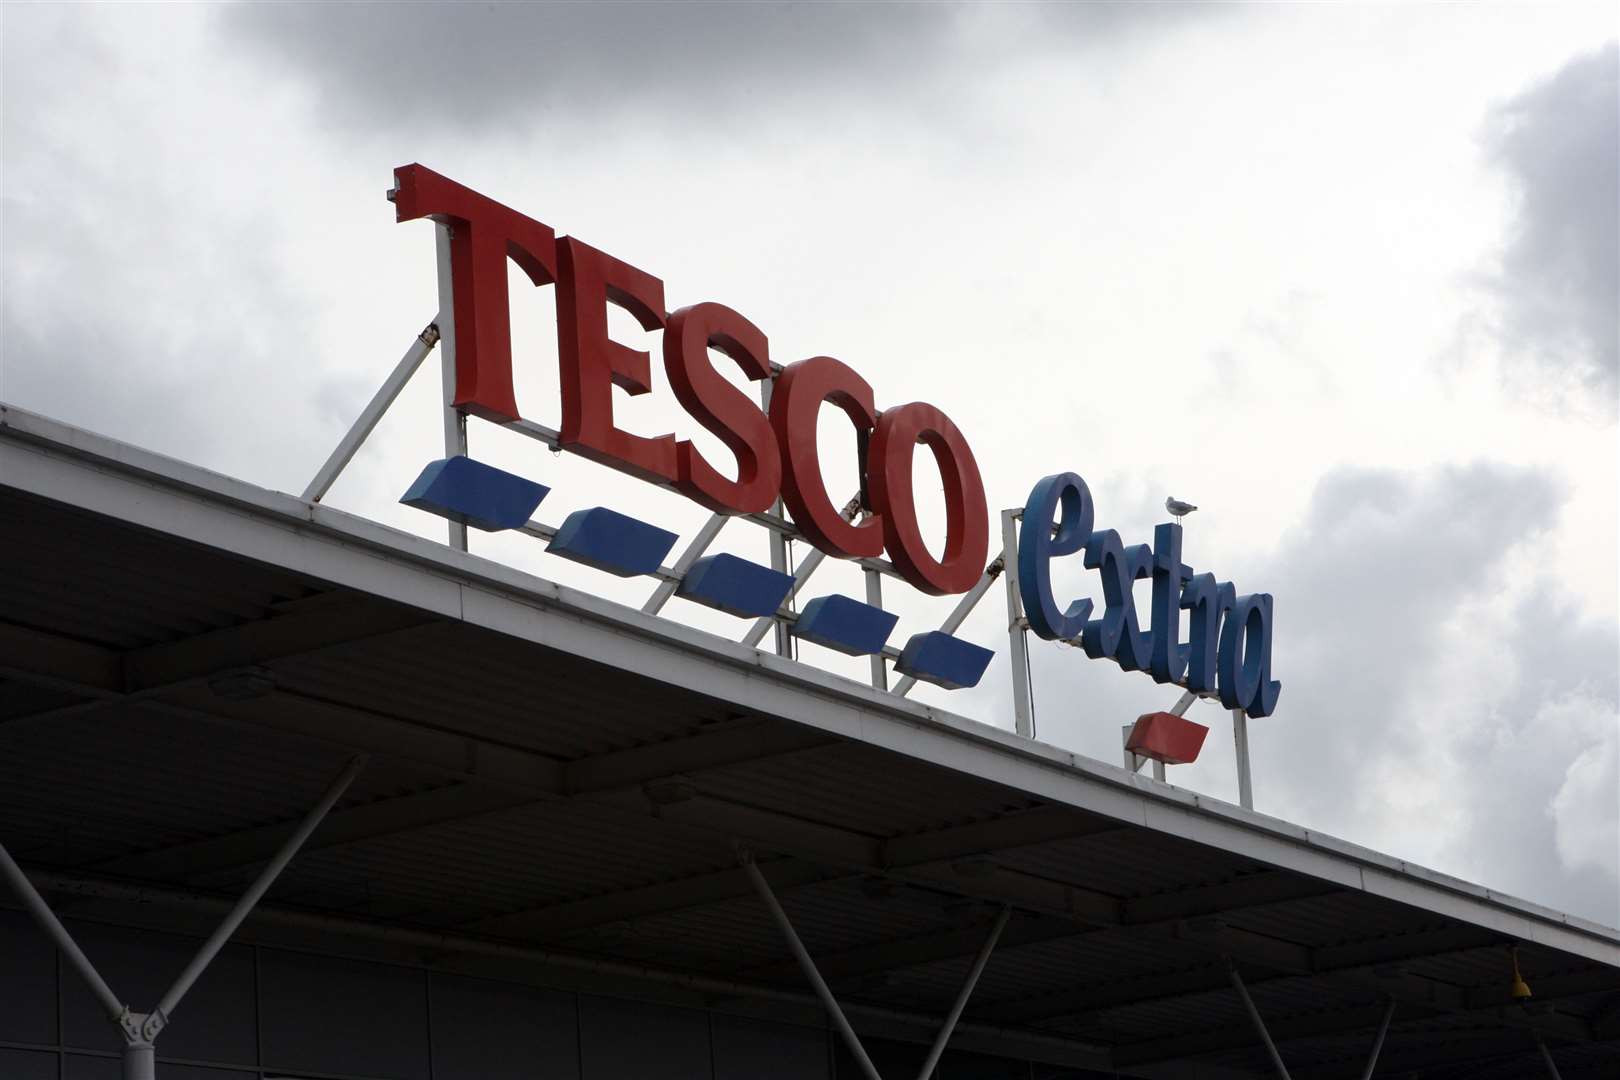 NHS staff can browse Tesco stores before the checkouts are opened